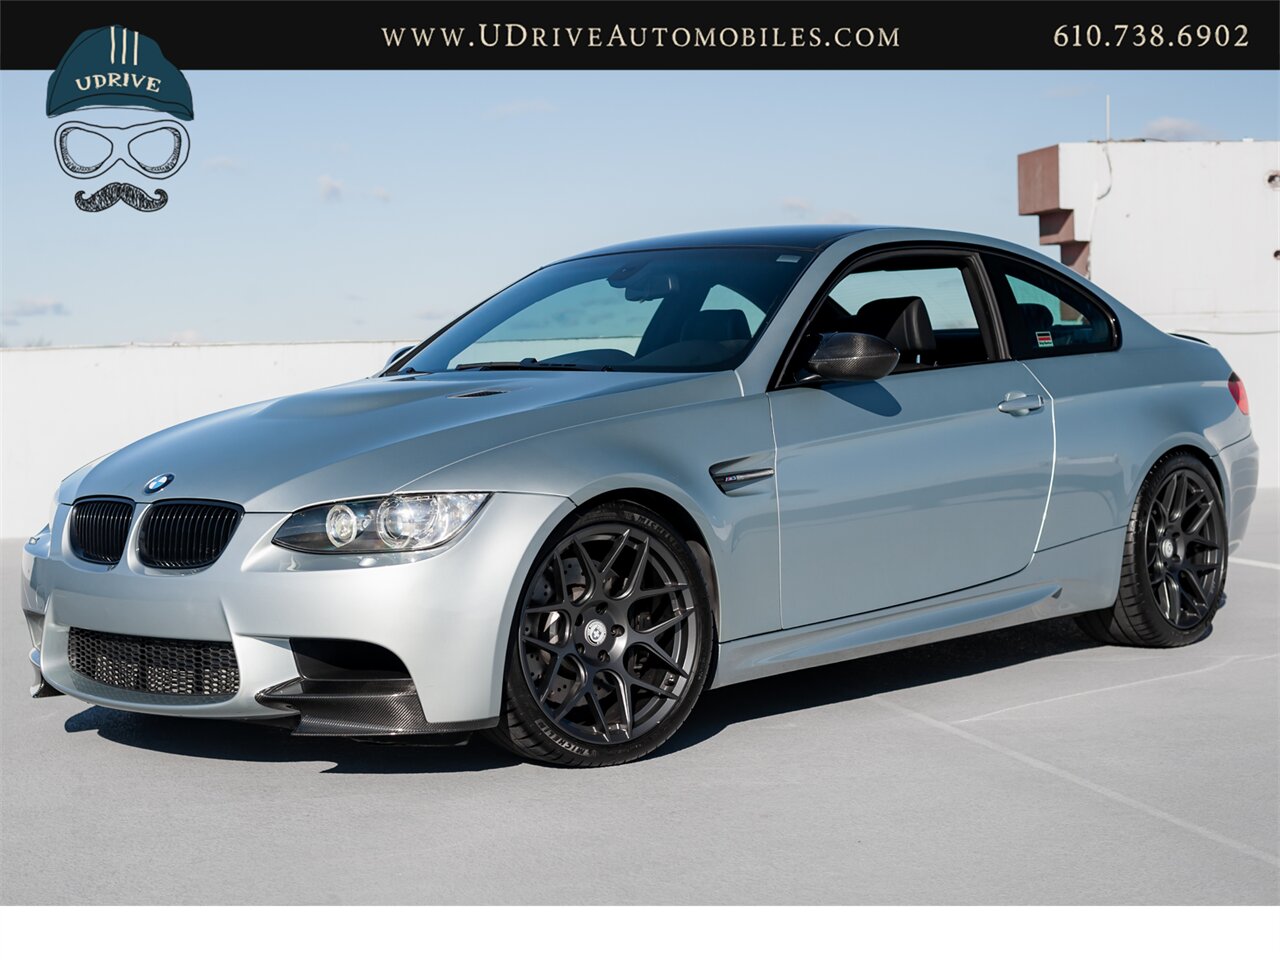 2008 BMW M3 Dinan S3-R M3 1 of 36 Produced DCT  1 Owner Full Service History 4.6L Stroker V8 - Photo 1 - West Chester, PA 19382